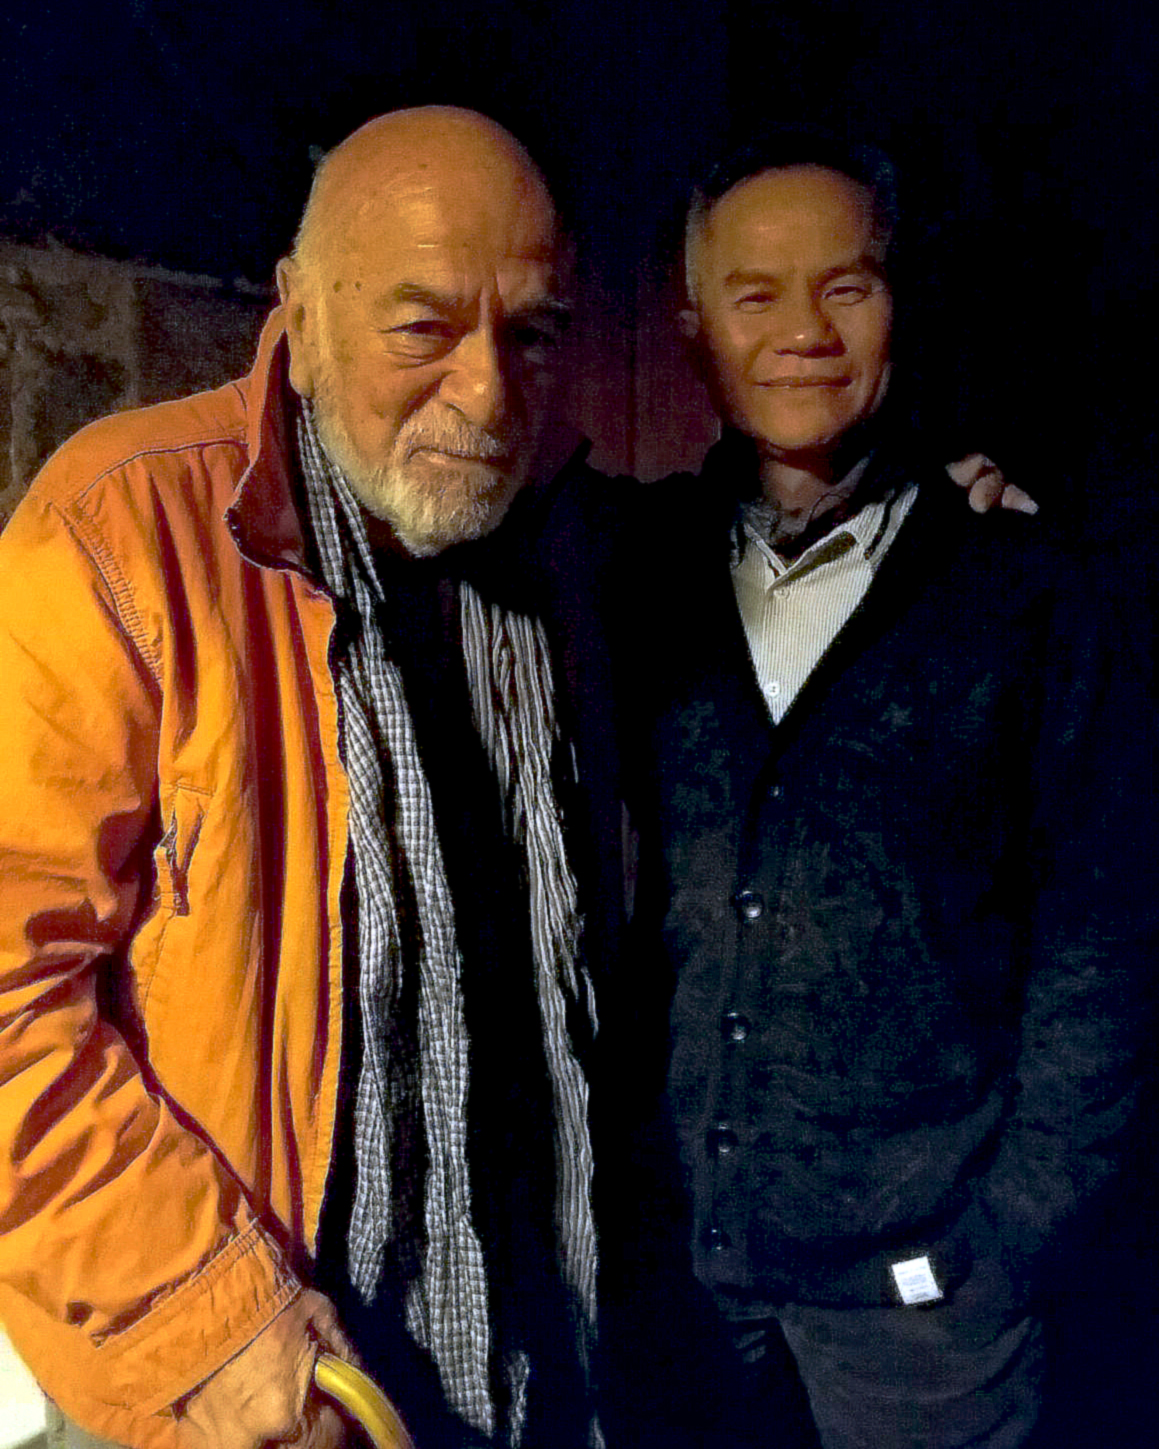 Enrique Vargas, the ensemble’s founder/artistic director and anthropologist (Left) and Hong Kong theatre director and theorist Tang Shu-wing (Right)